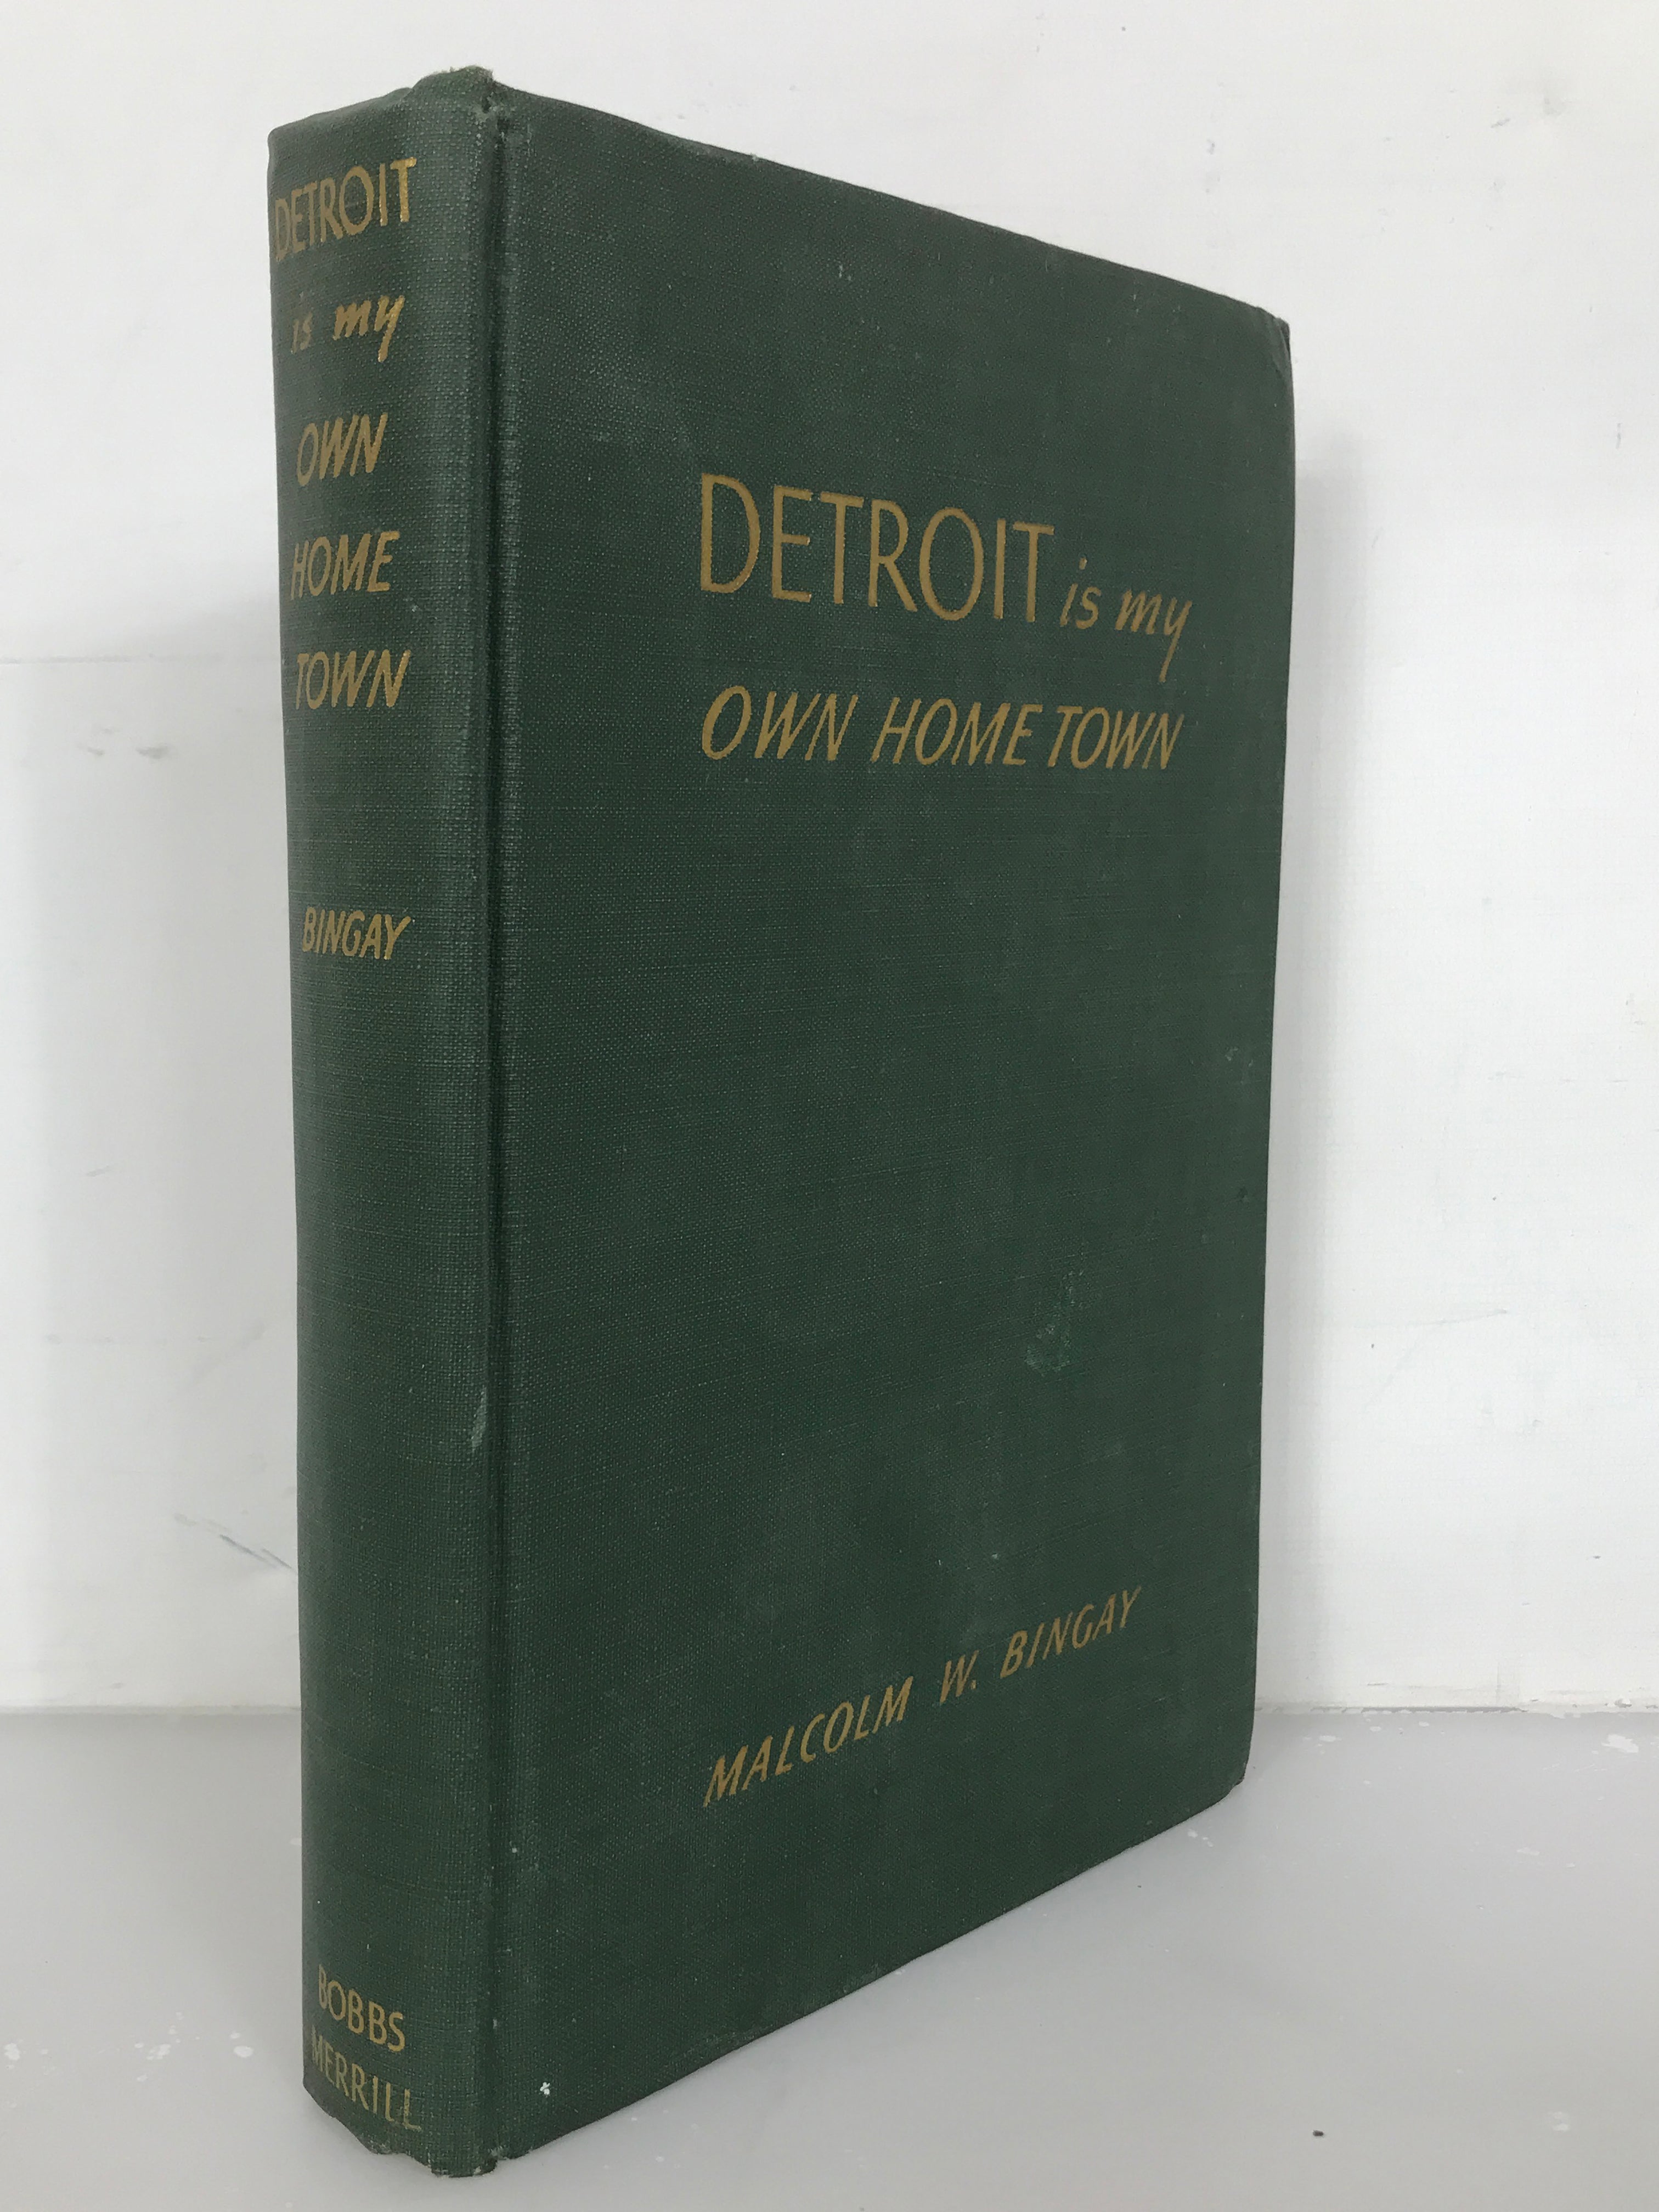 Detroit is My Own Home Town by Malcolm W. Bingay HC 1946